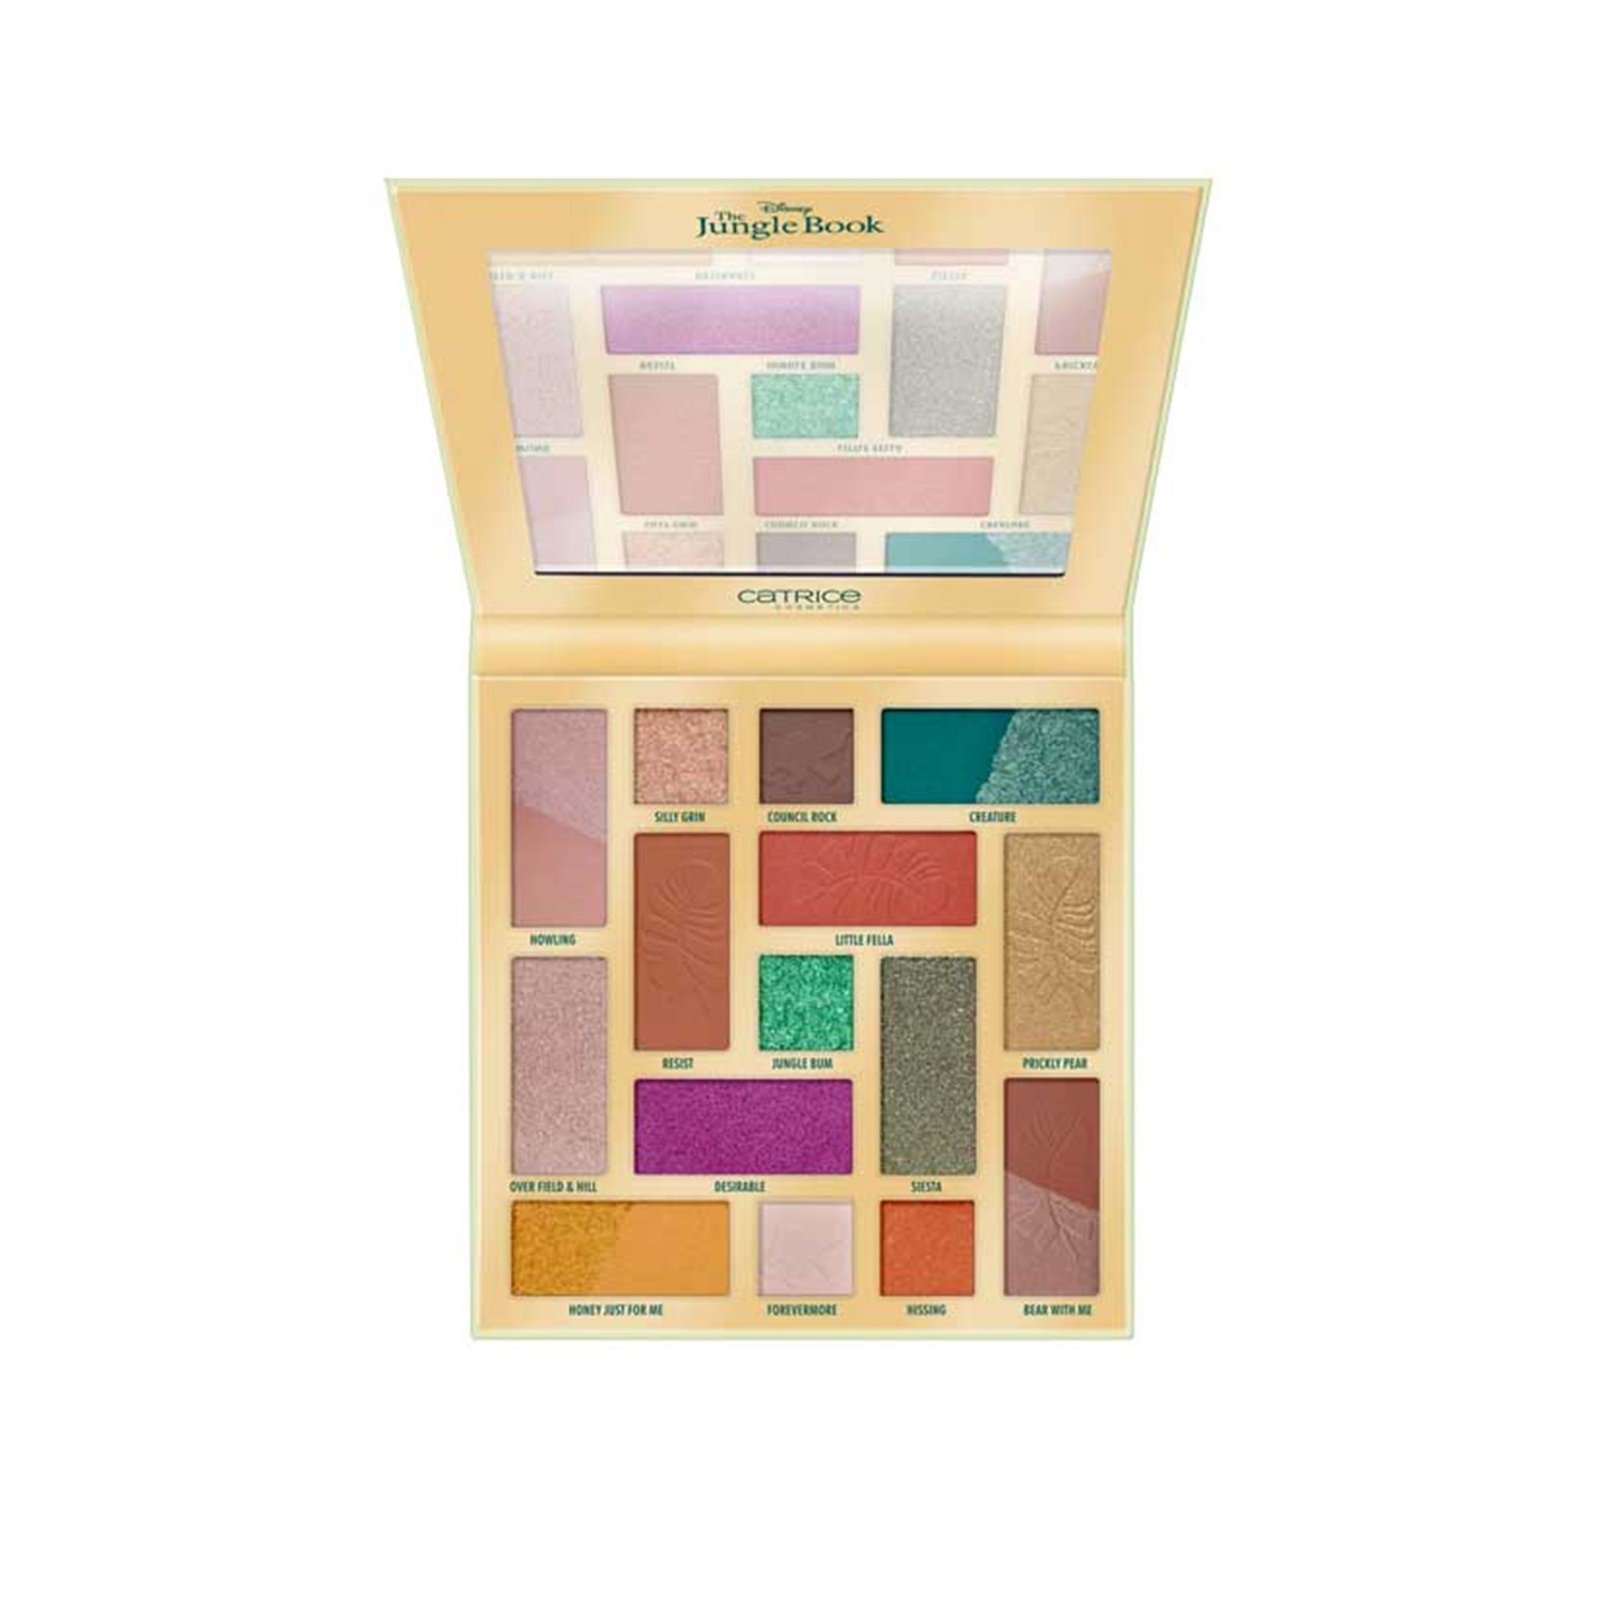 In Stay Palette Book 28g Aruba Disney Buy Jungle Eyeshadow Catrice Jungle 020 · The The